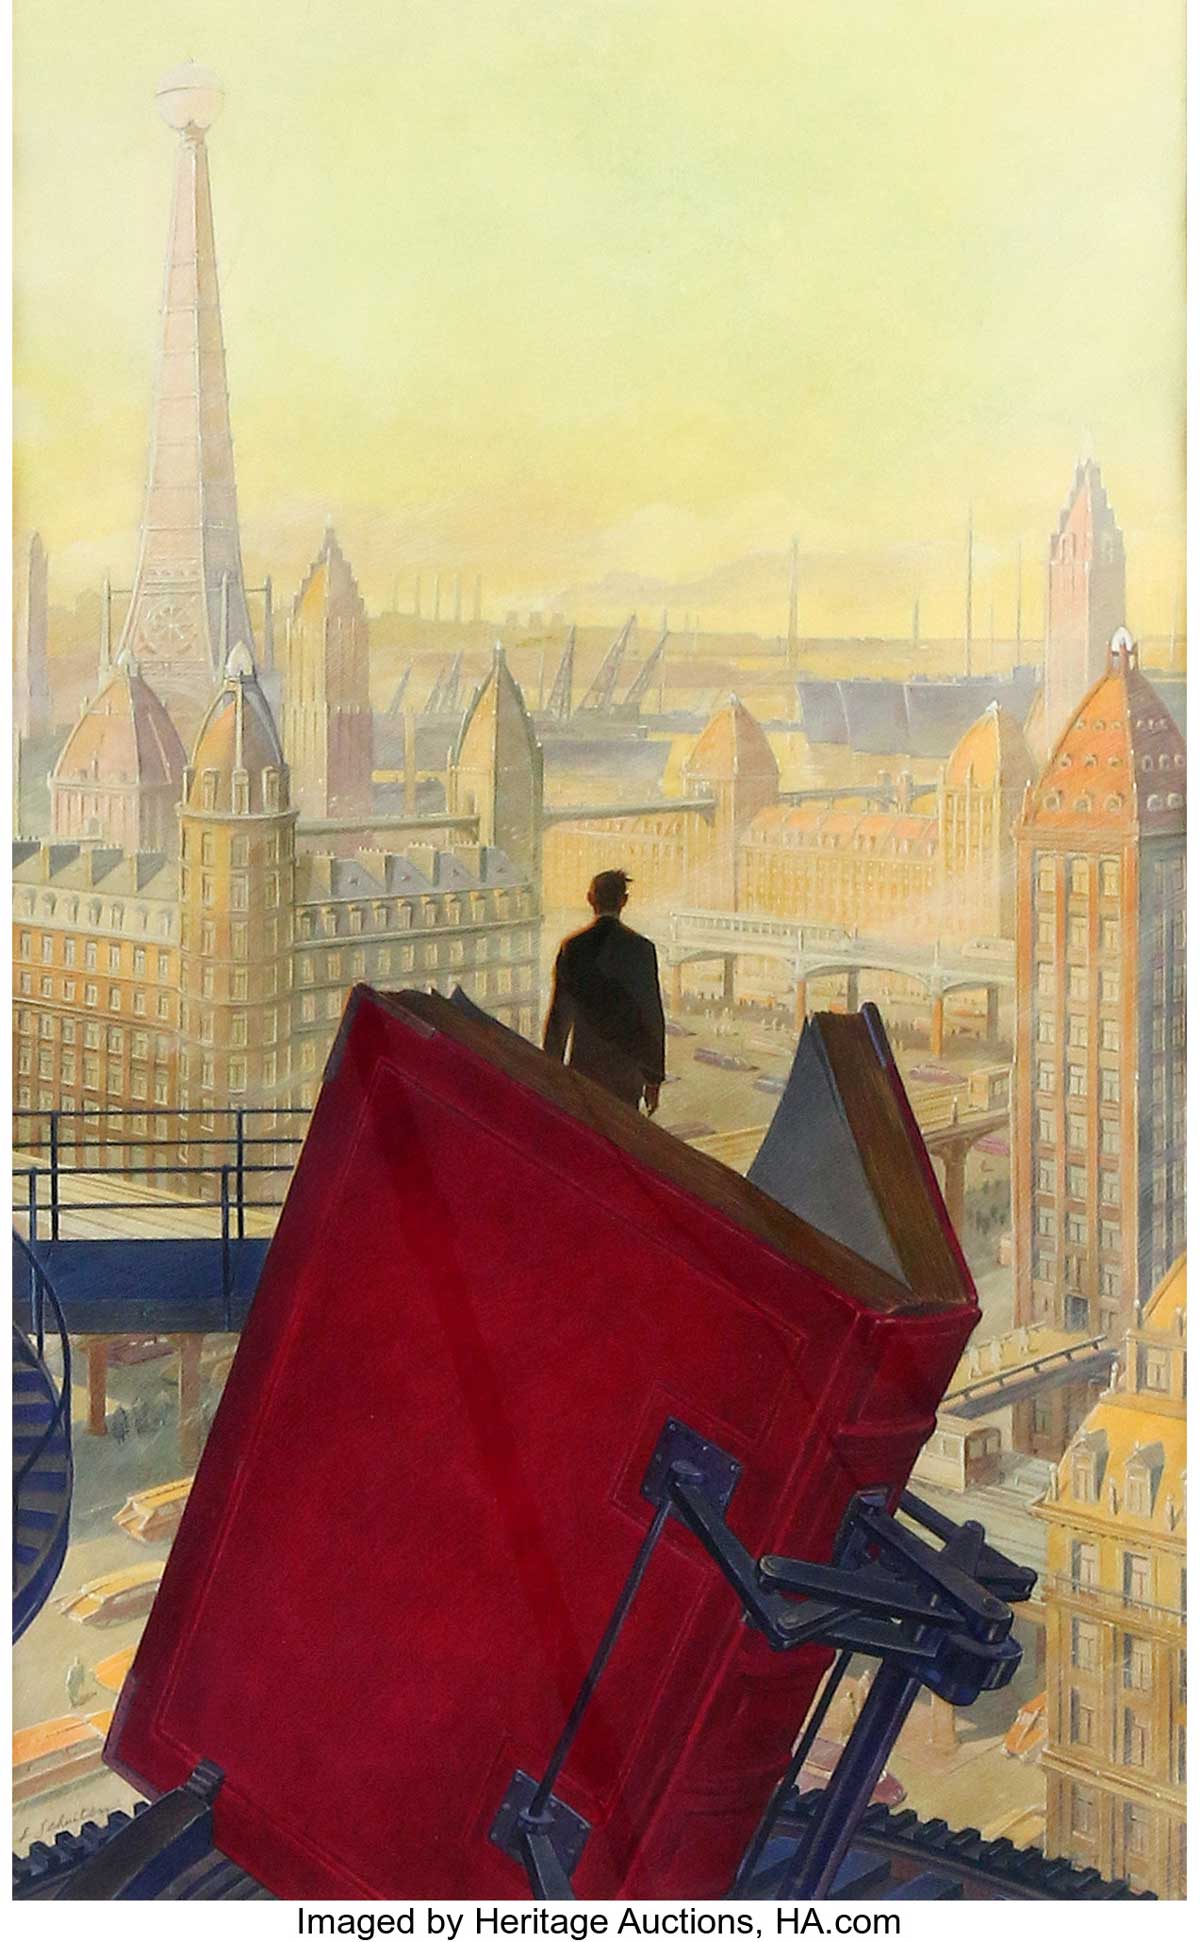 François Schuiten Paris in the Twentieth Century Cover Original Art (Hachette, 1994). This major drawing was created by the co-author of The Obscure Cities for the cover of Jules Verne's "forgotten" novel published in 1994. 